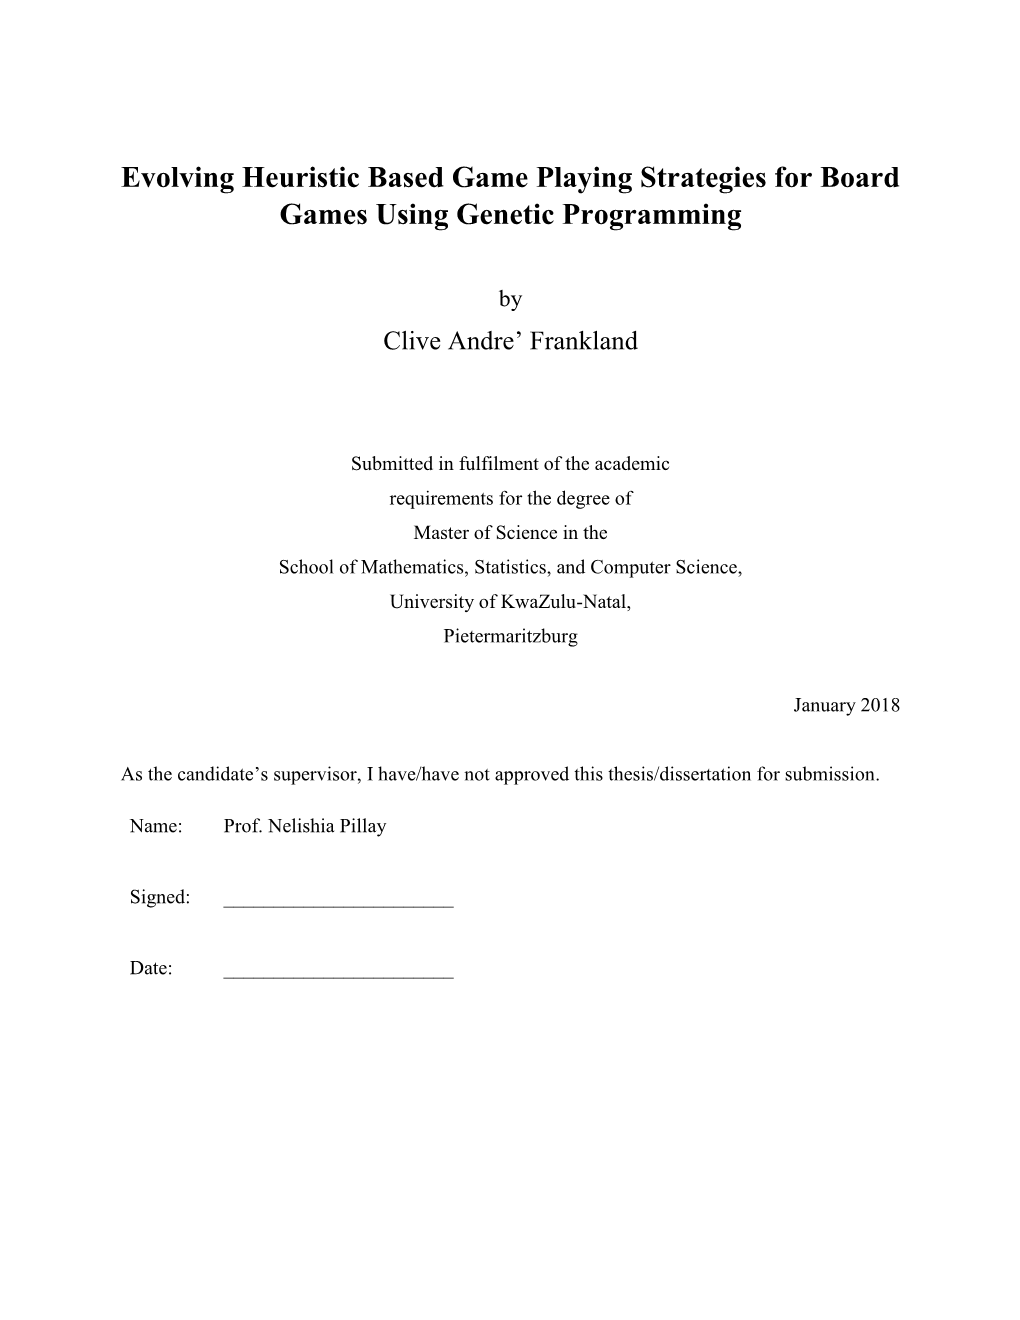 Evolving Heuristic Based Game Playing Strategies for Board Games Using Genetic Programming